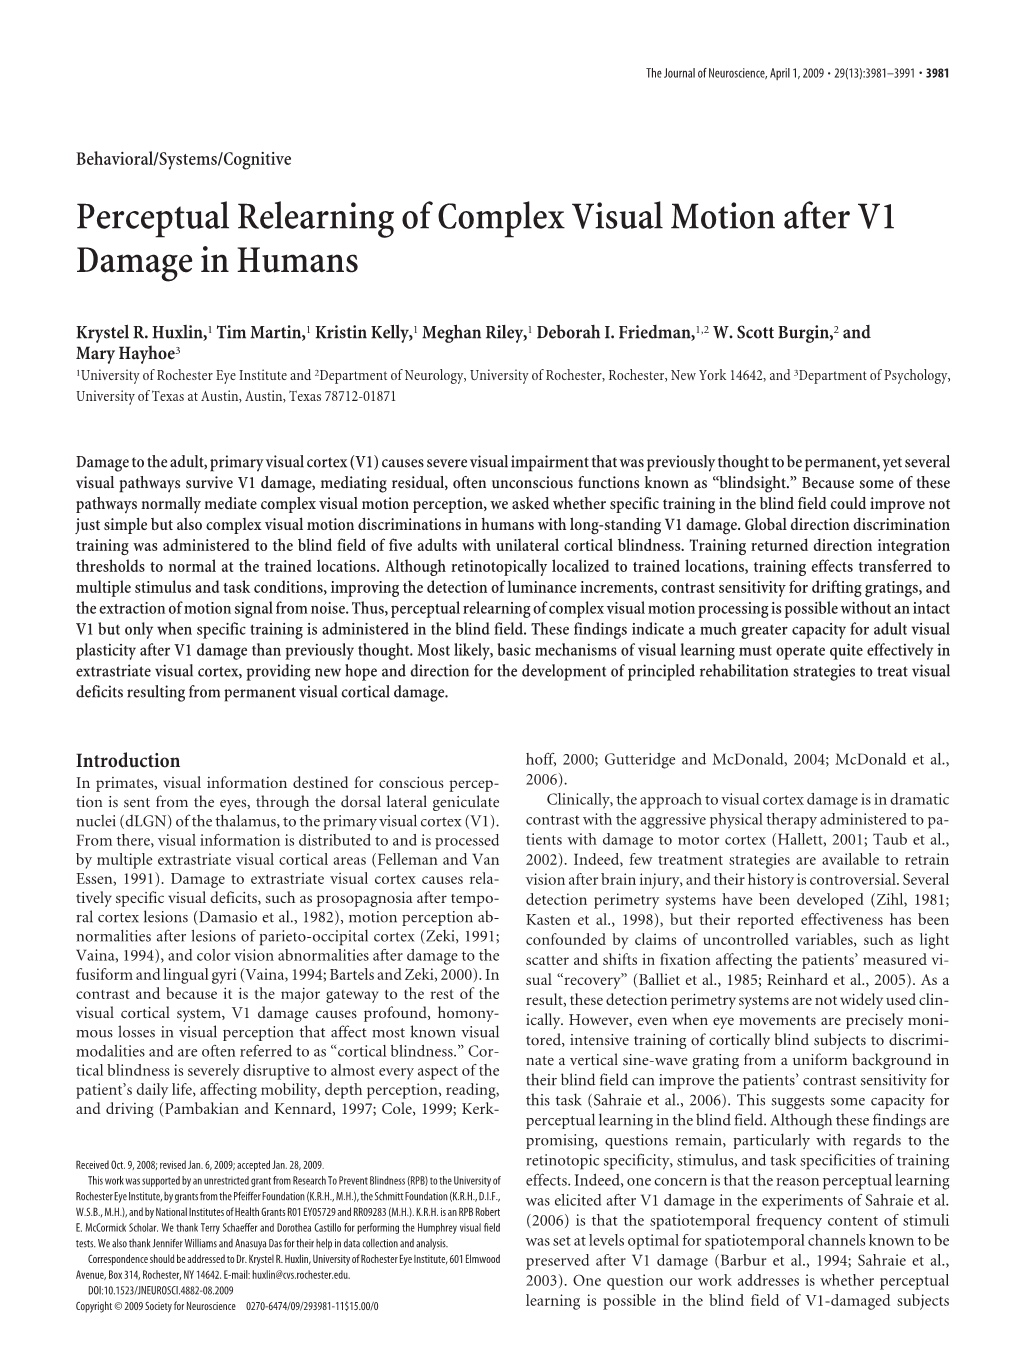 Perceptual Relearning of Complex Visual Motion After V1 Damage in Humans